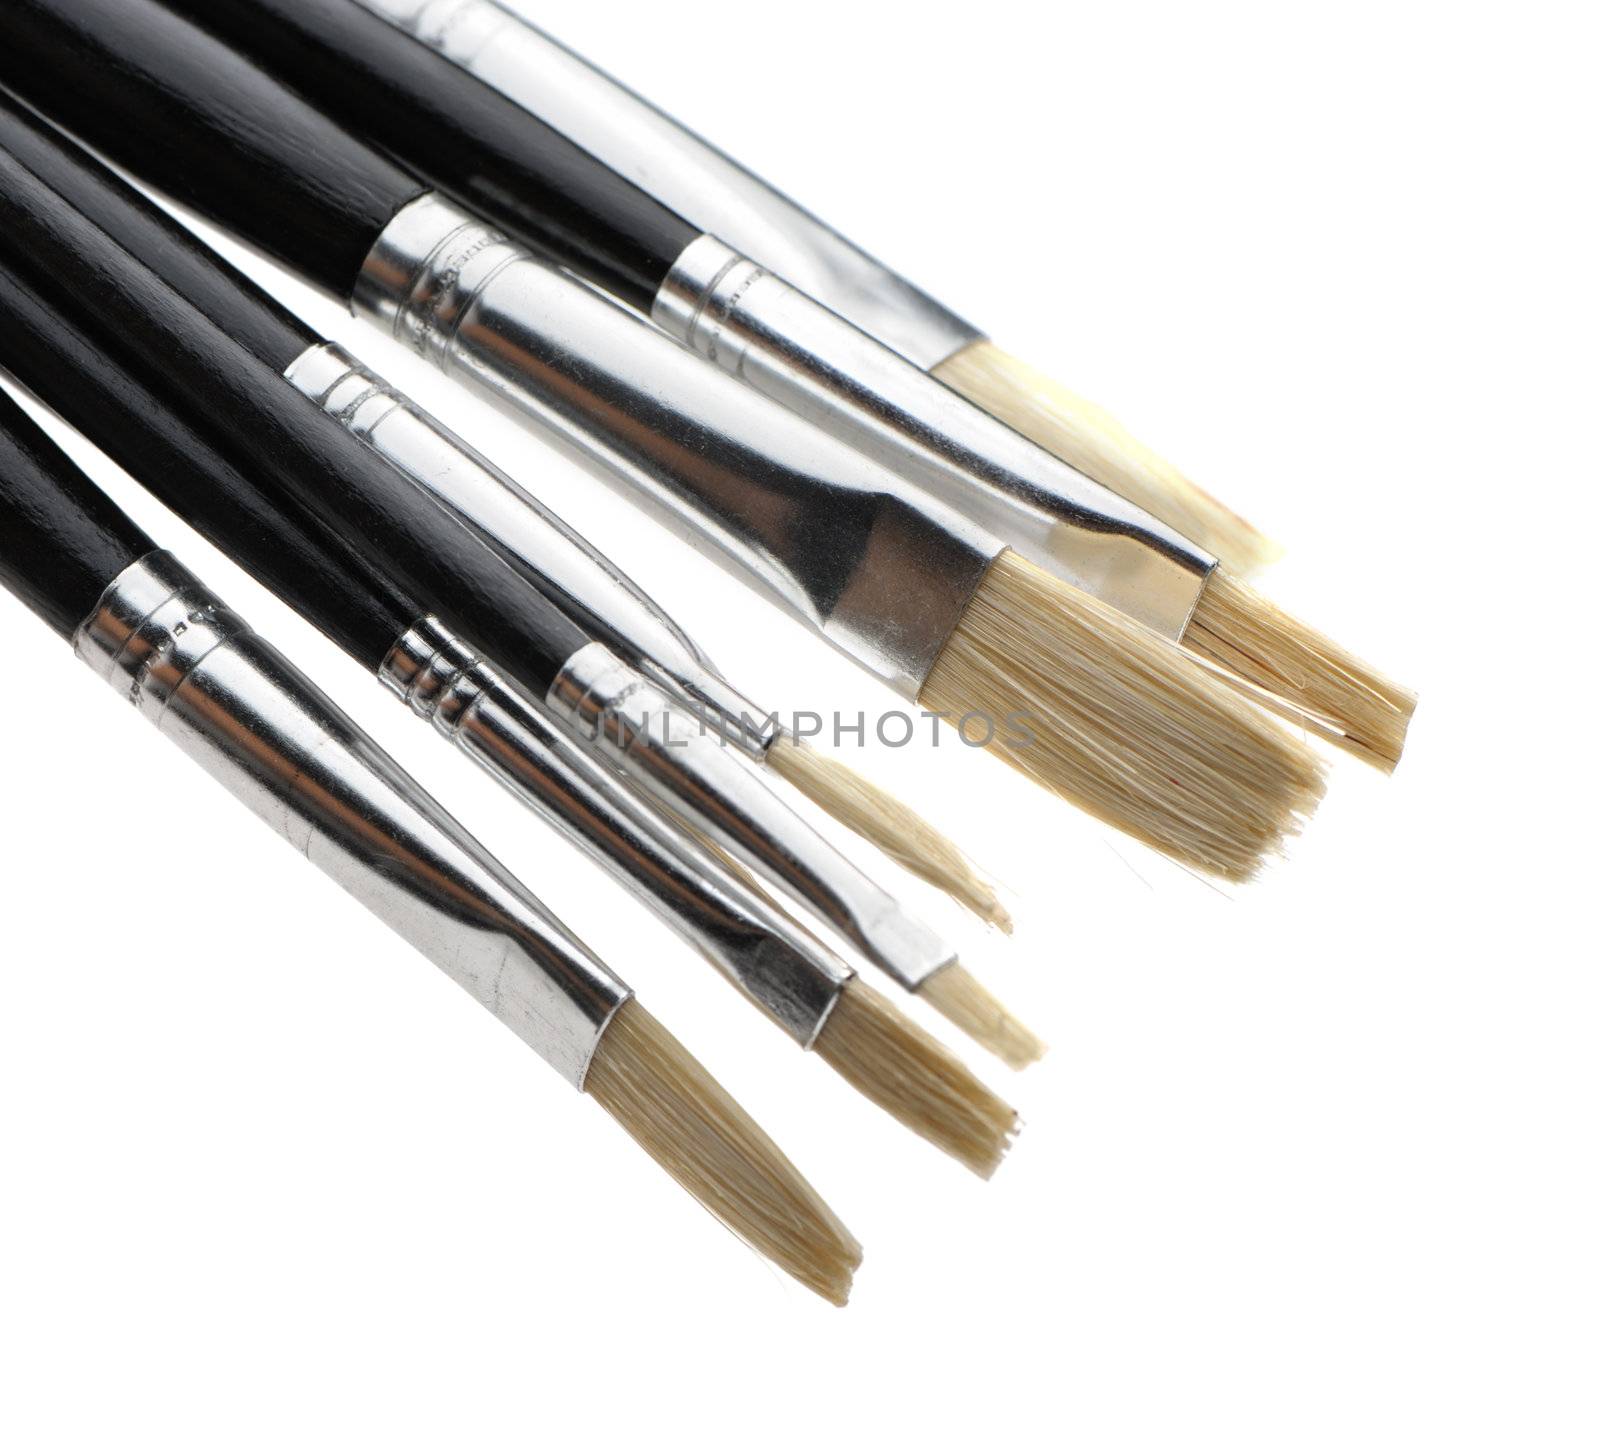 Art brushes close up. It is isolated on a white background